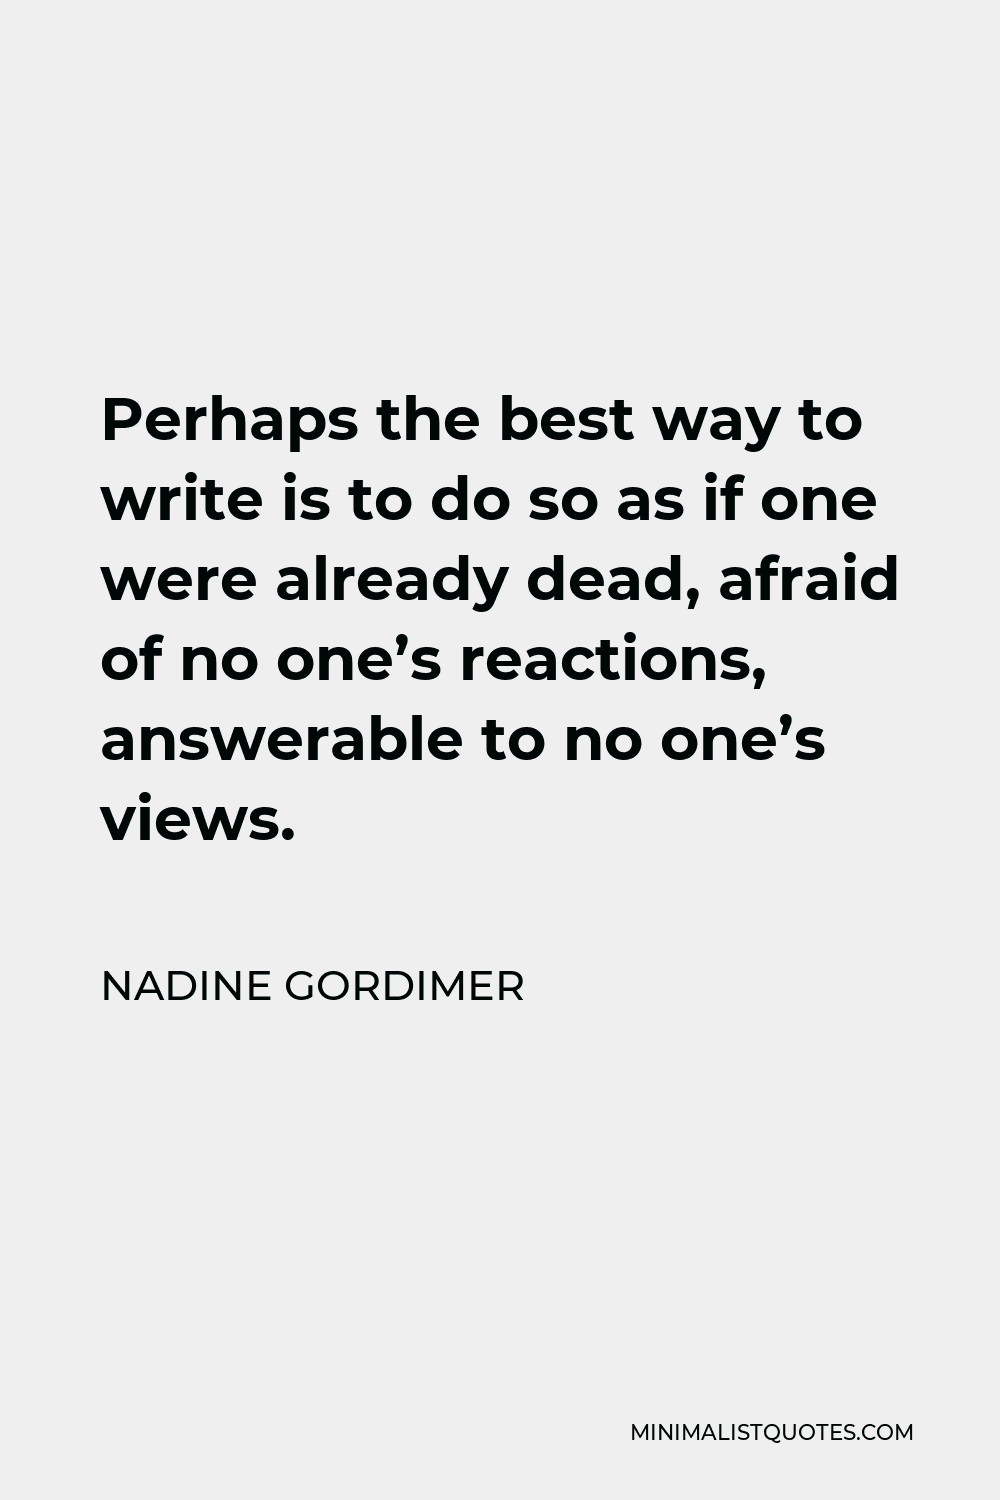 Nadine Gordimer Quote - Perhaps the best way to write is to do so as if one were already dead, afraid of no one’s reactions, answerable to no one’s views.